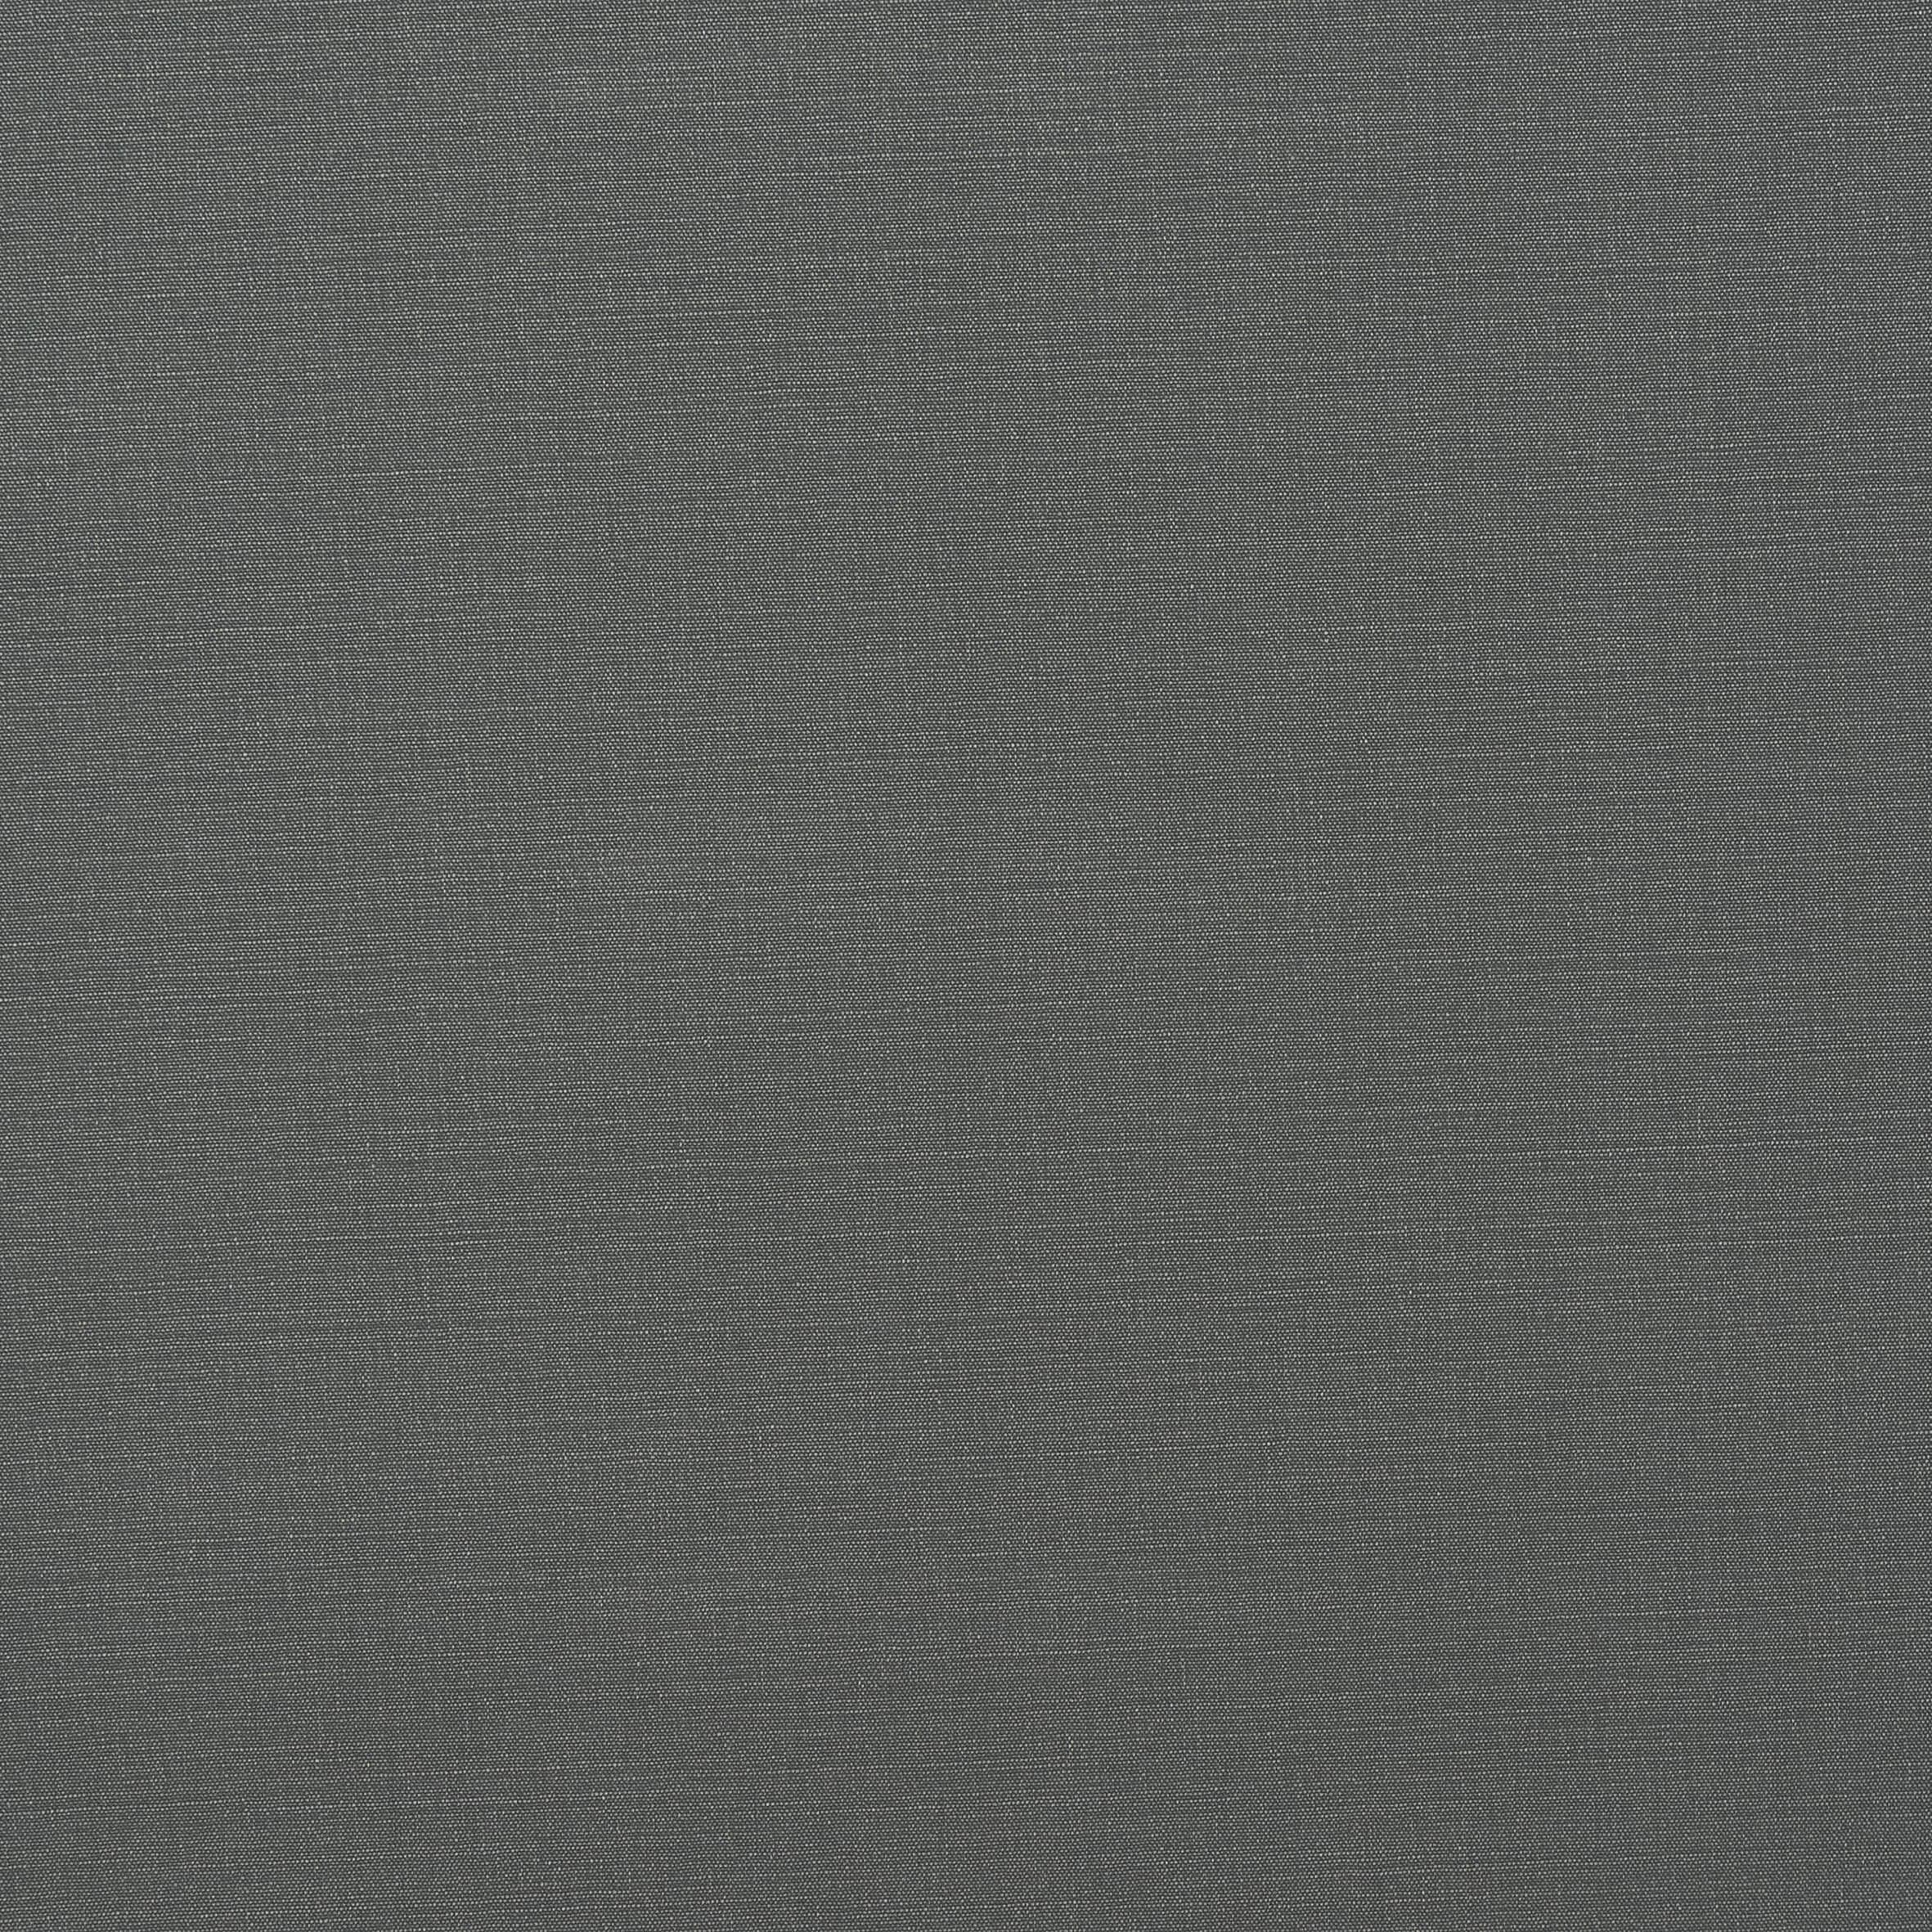 Bismark 25 Grey by Stout Fabric